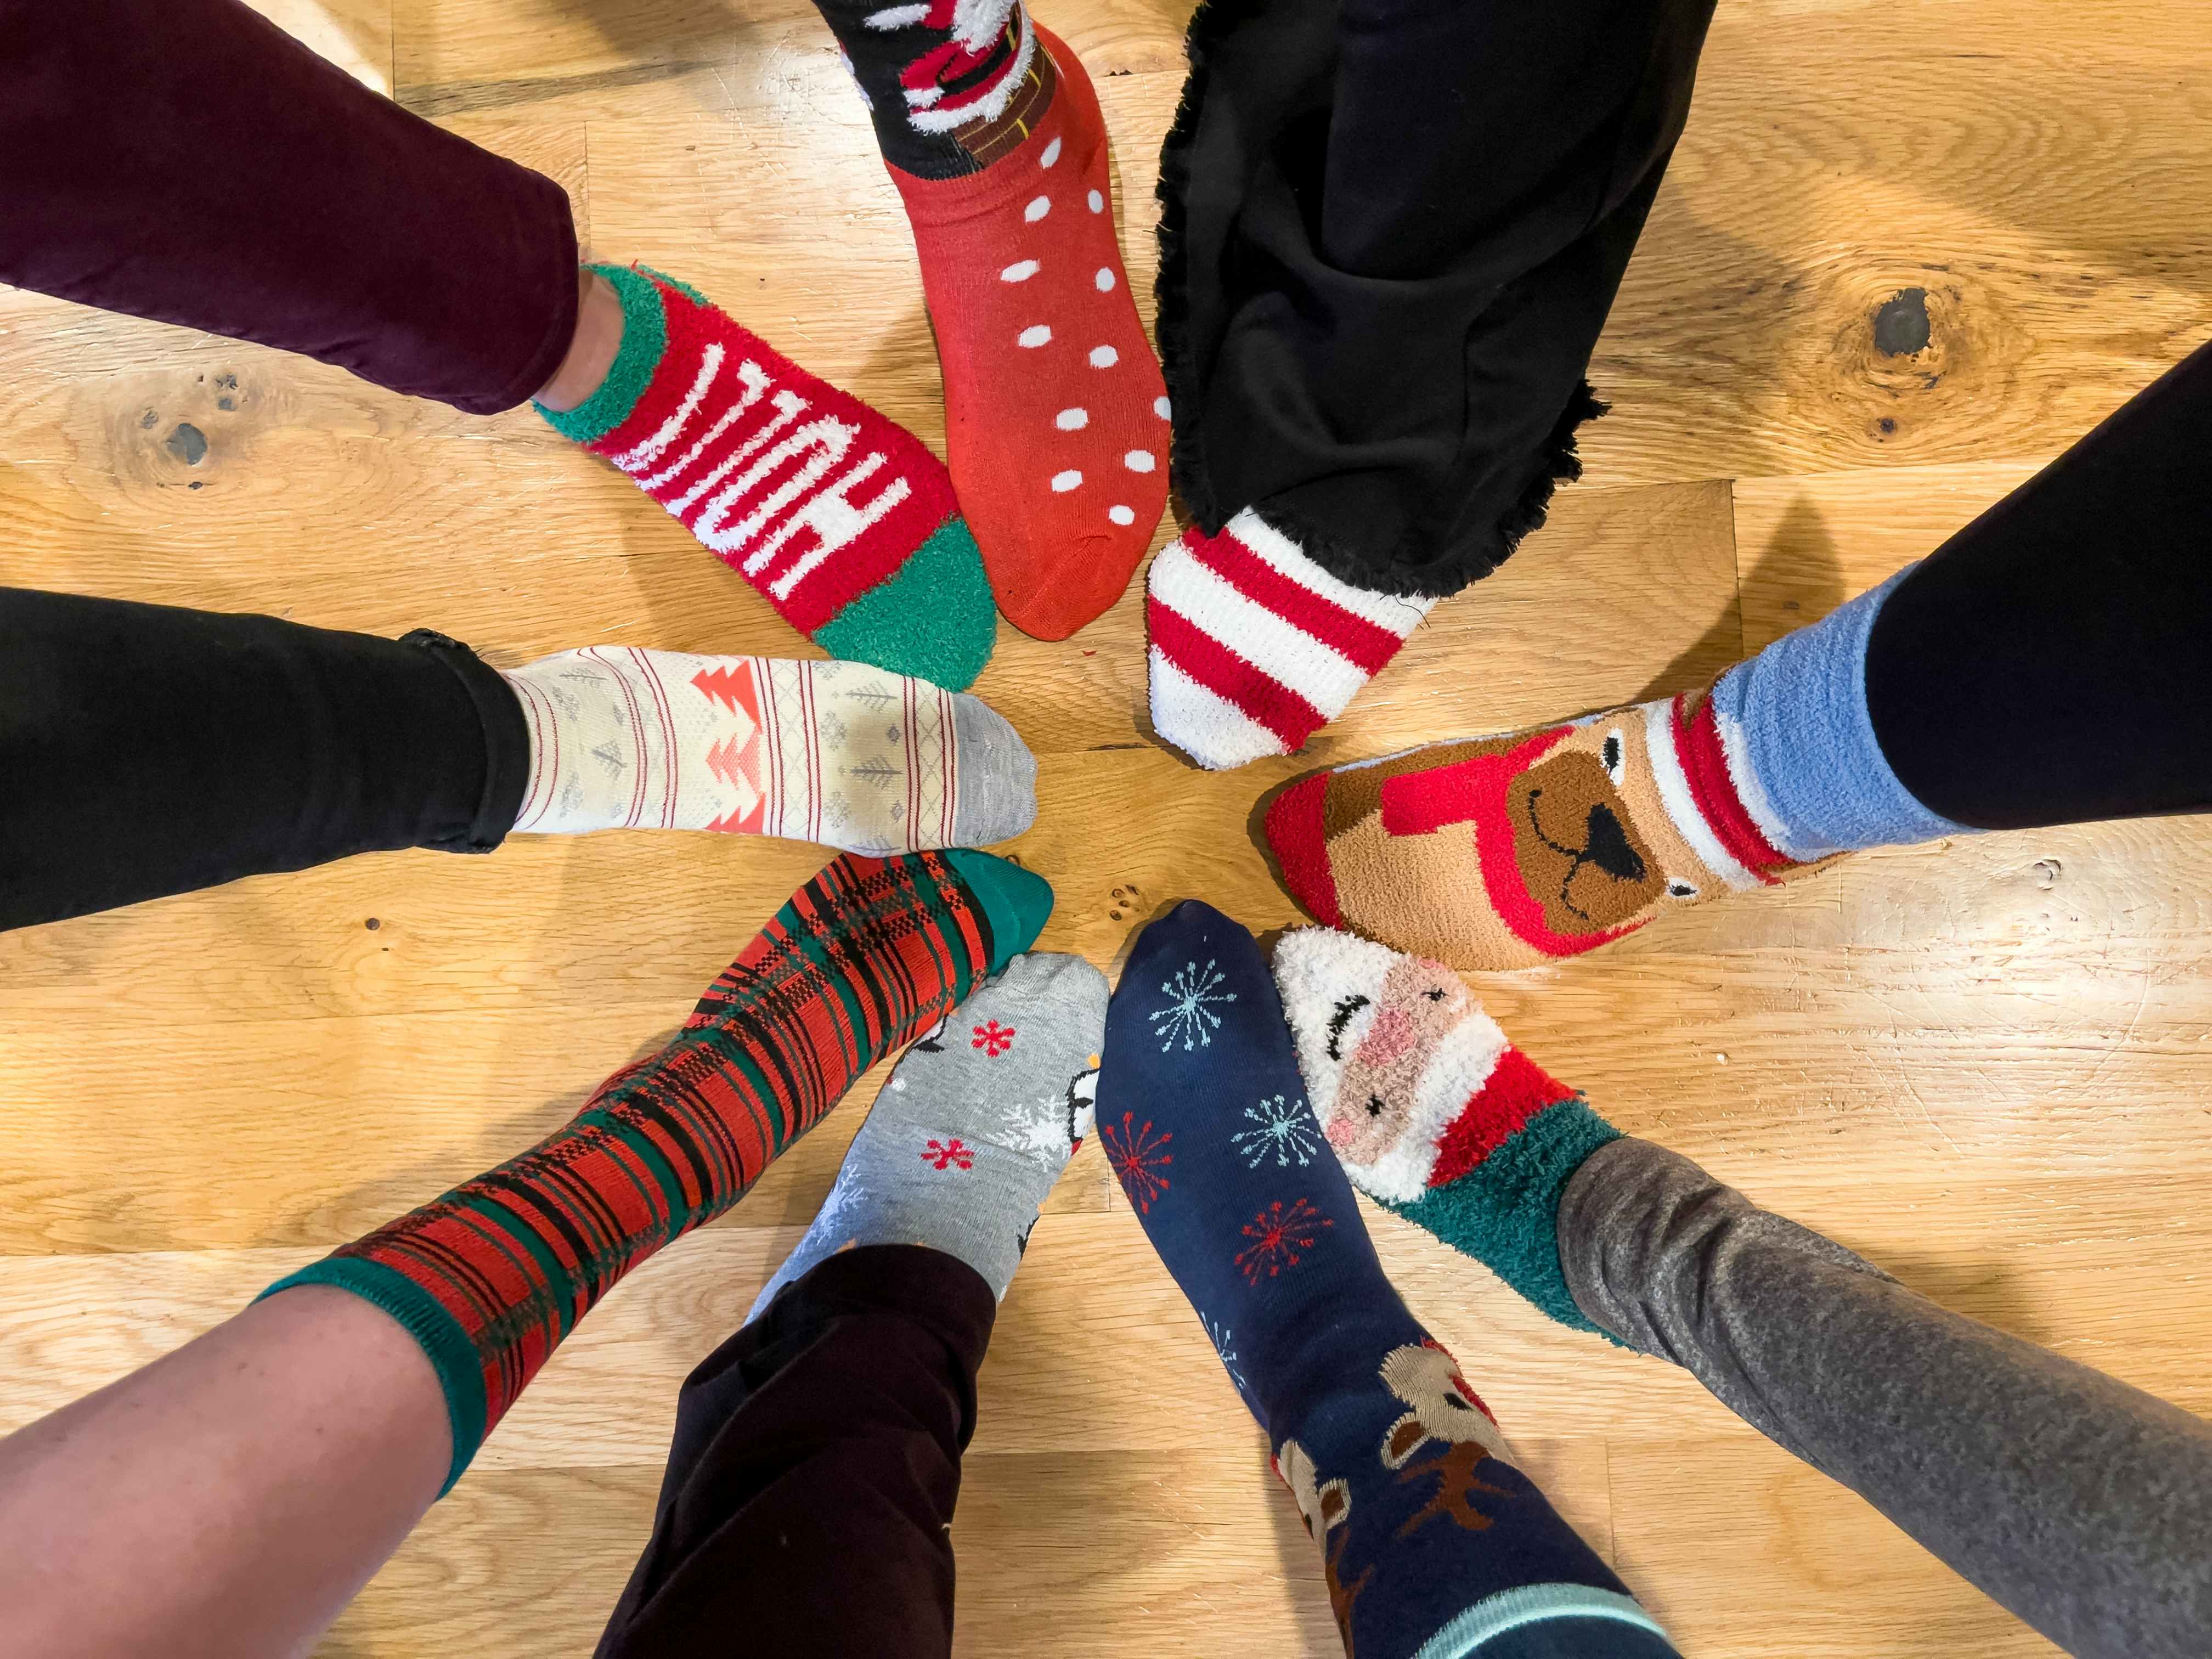 Create your Christmas look: How to turn everyday footwear into party shoes  by having fun with socks - CNA Lifestyle